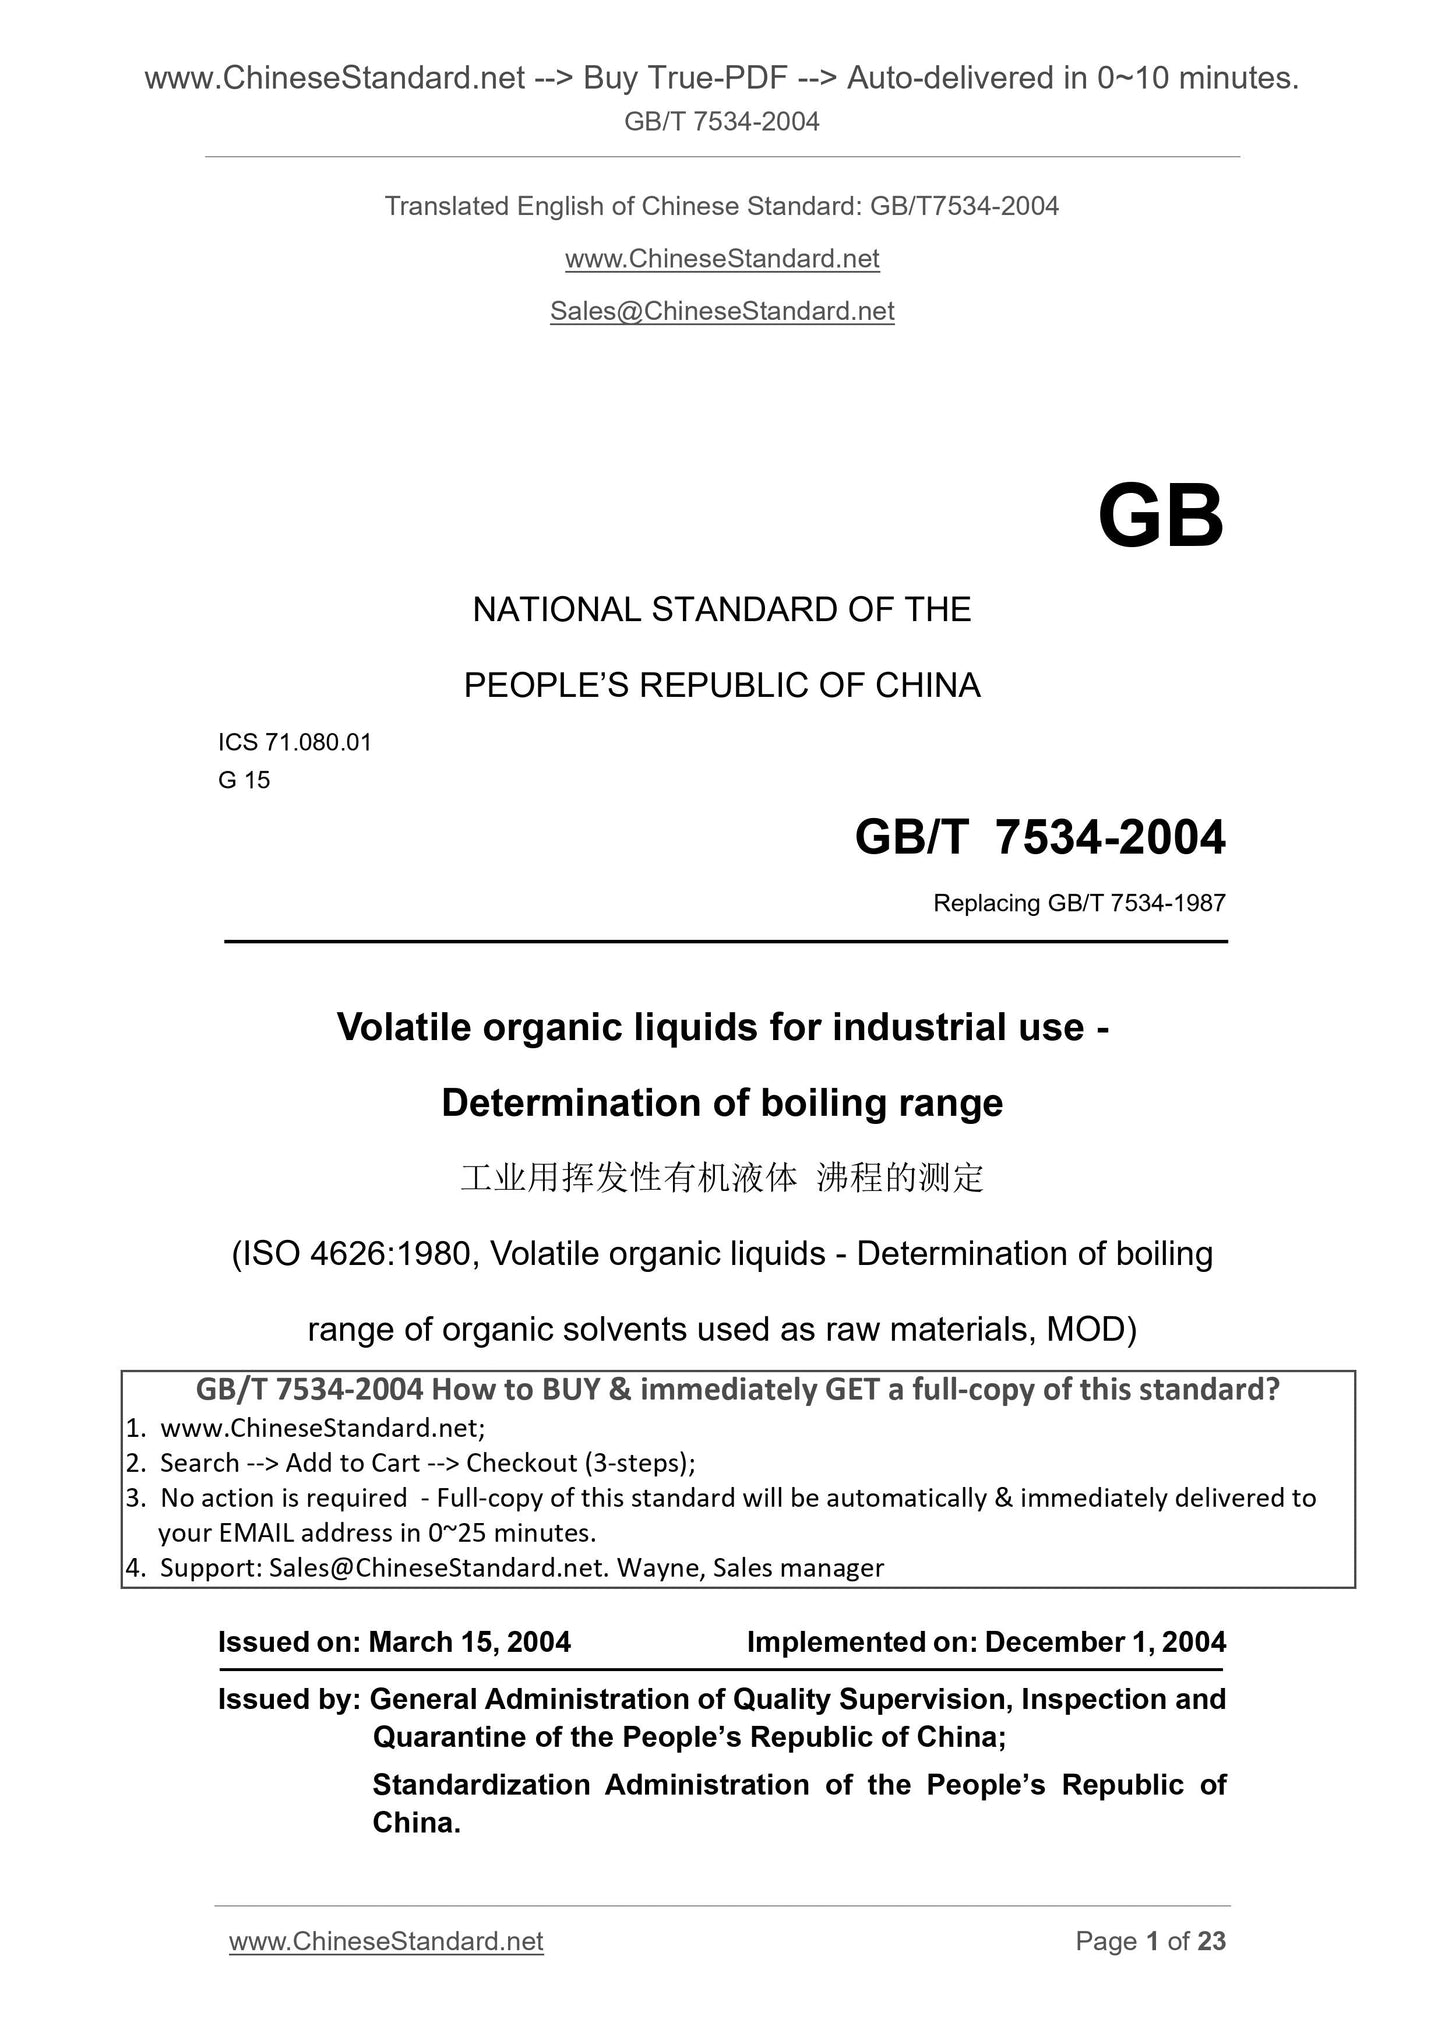 GB/T 7534-2004 Page 1